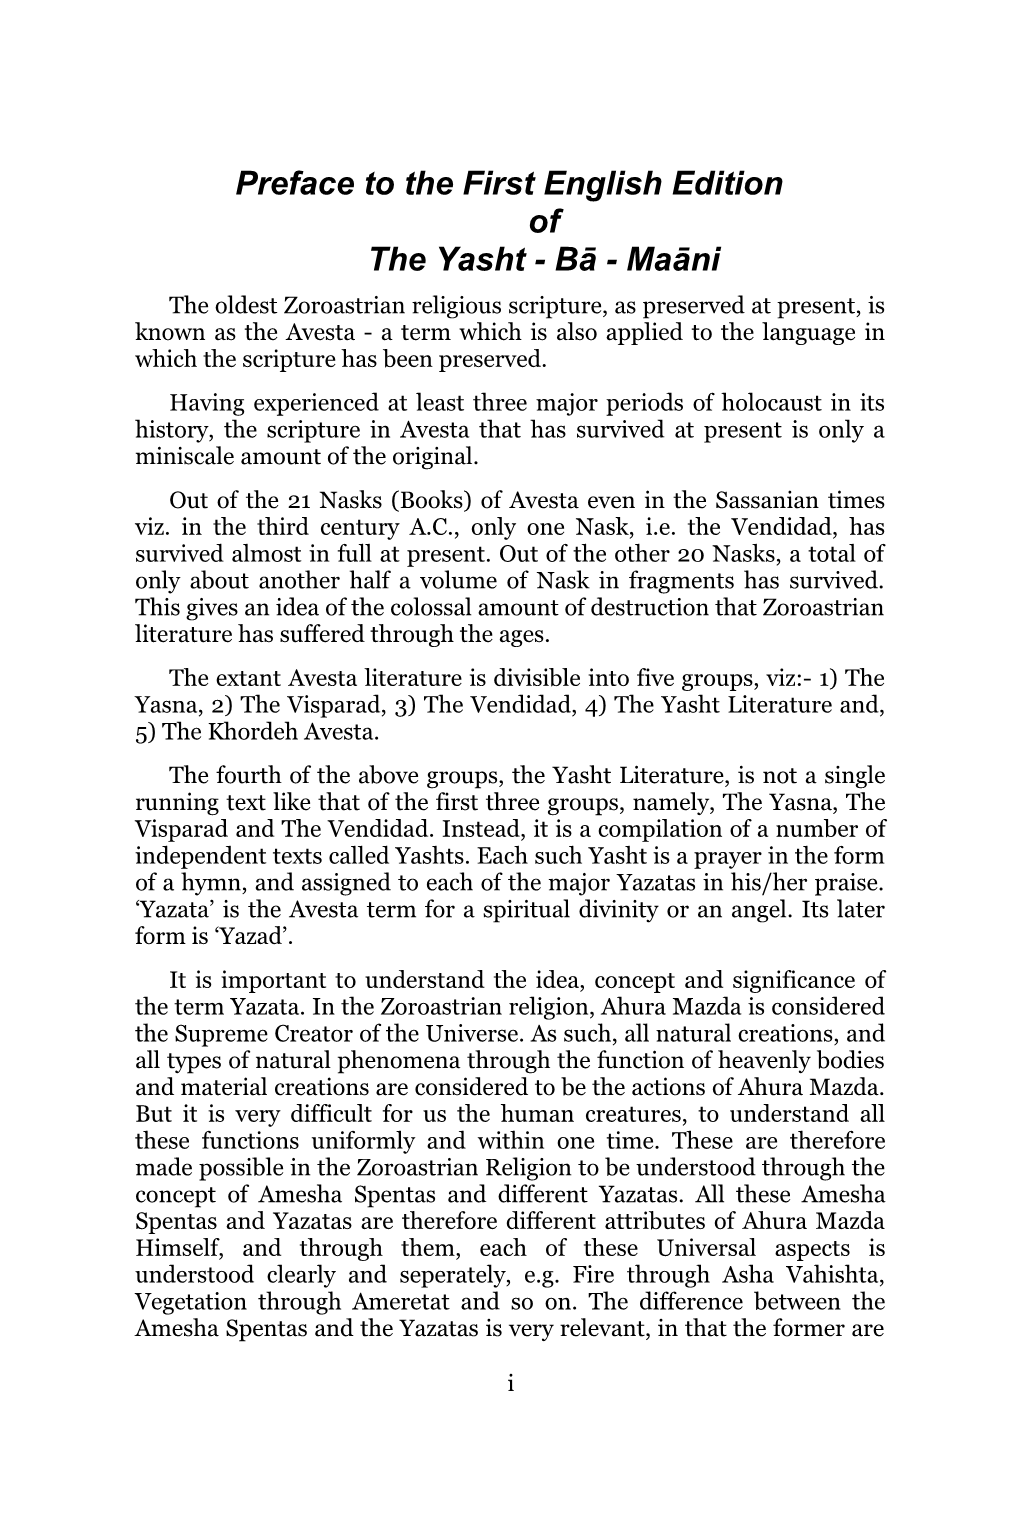 Preface to the First English Edition of the Yasht